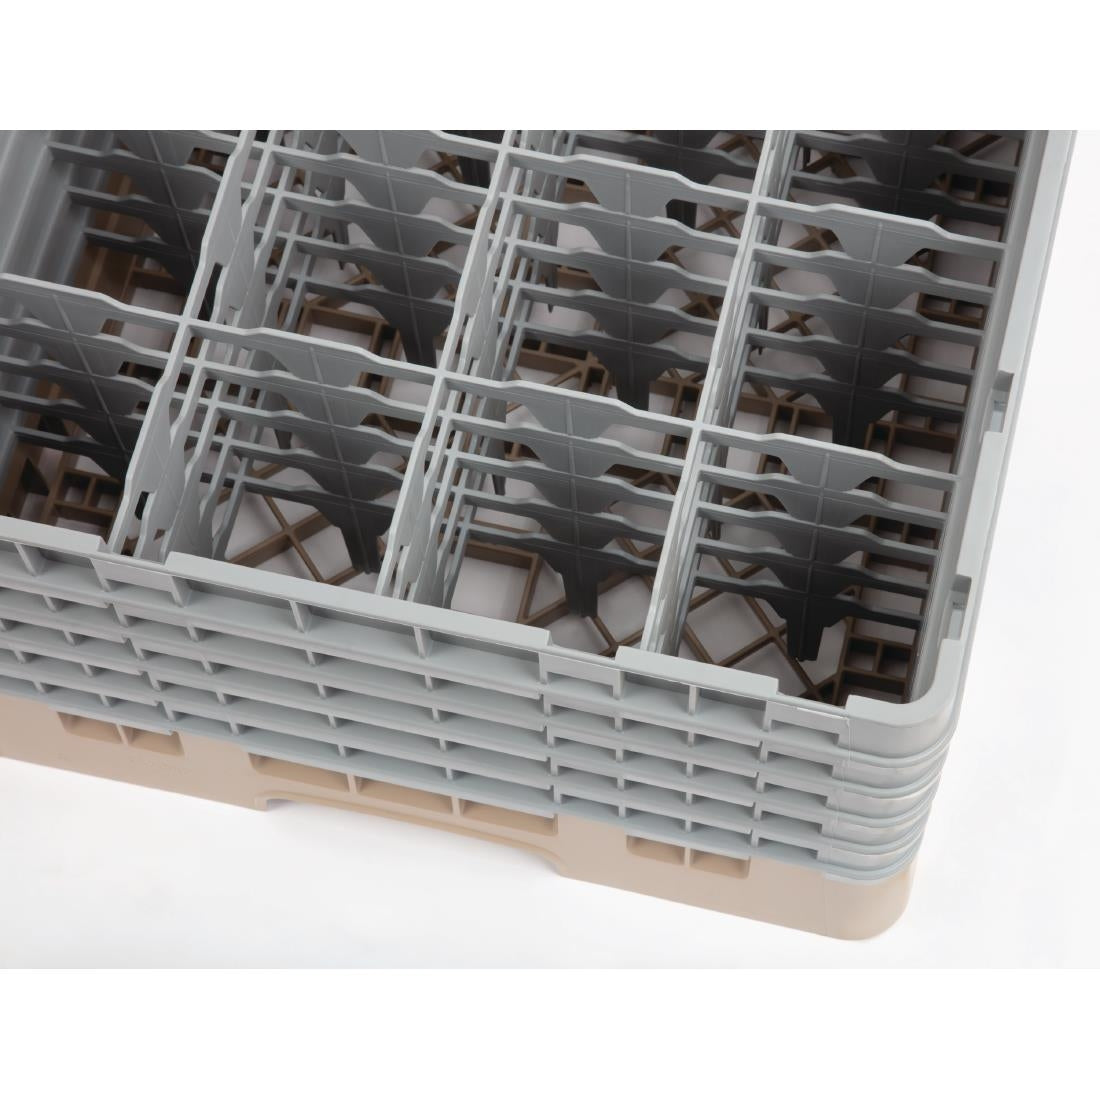 Cambro Camrack Beige 16 Compartments Max Glass Height 257mm JD Catering Equipment Solutions Ltd